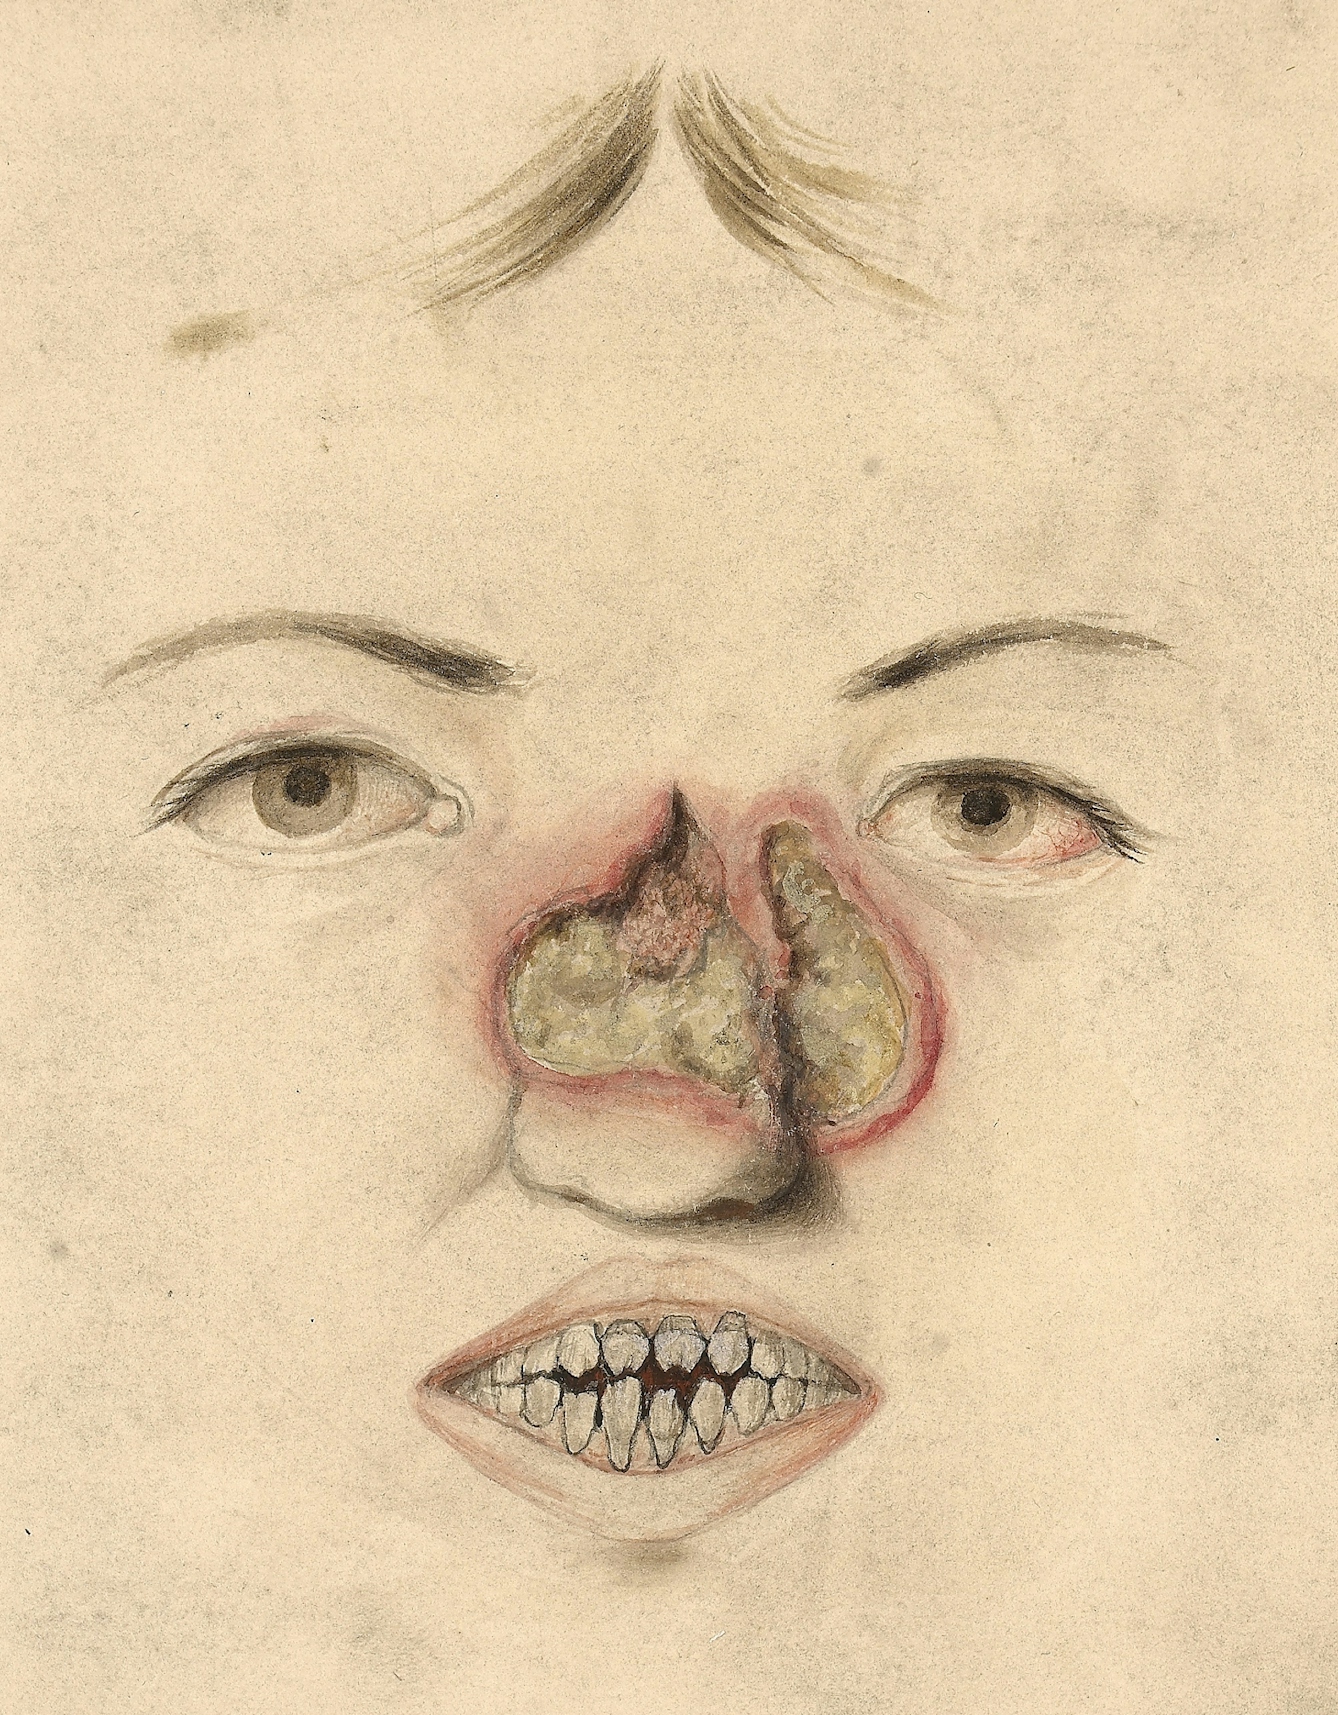 A 15-year-old girl with congenital syphilis.